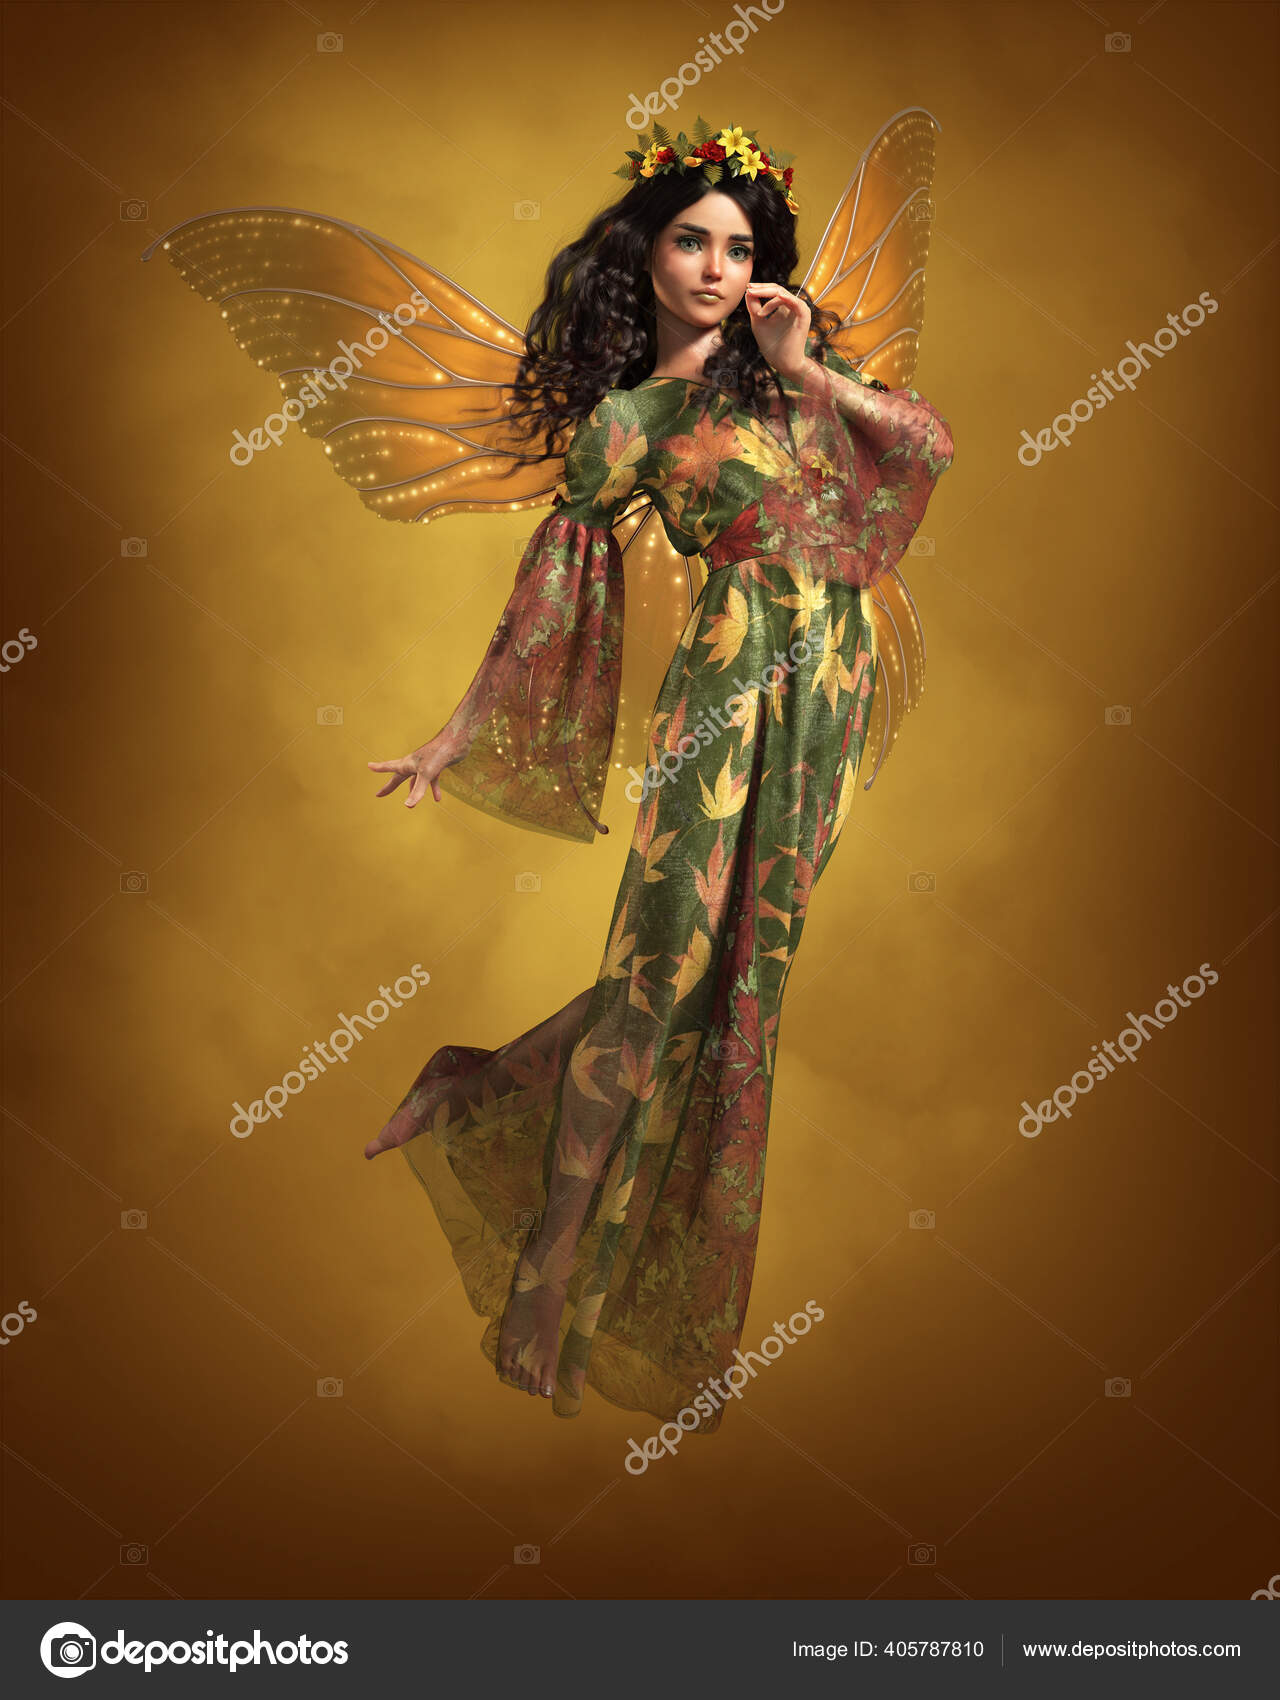 Puter graphics fairy autumnal dress yellow butterfly wings stock photo by majorgaine